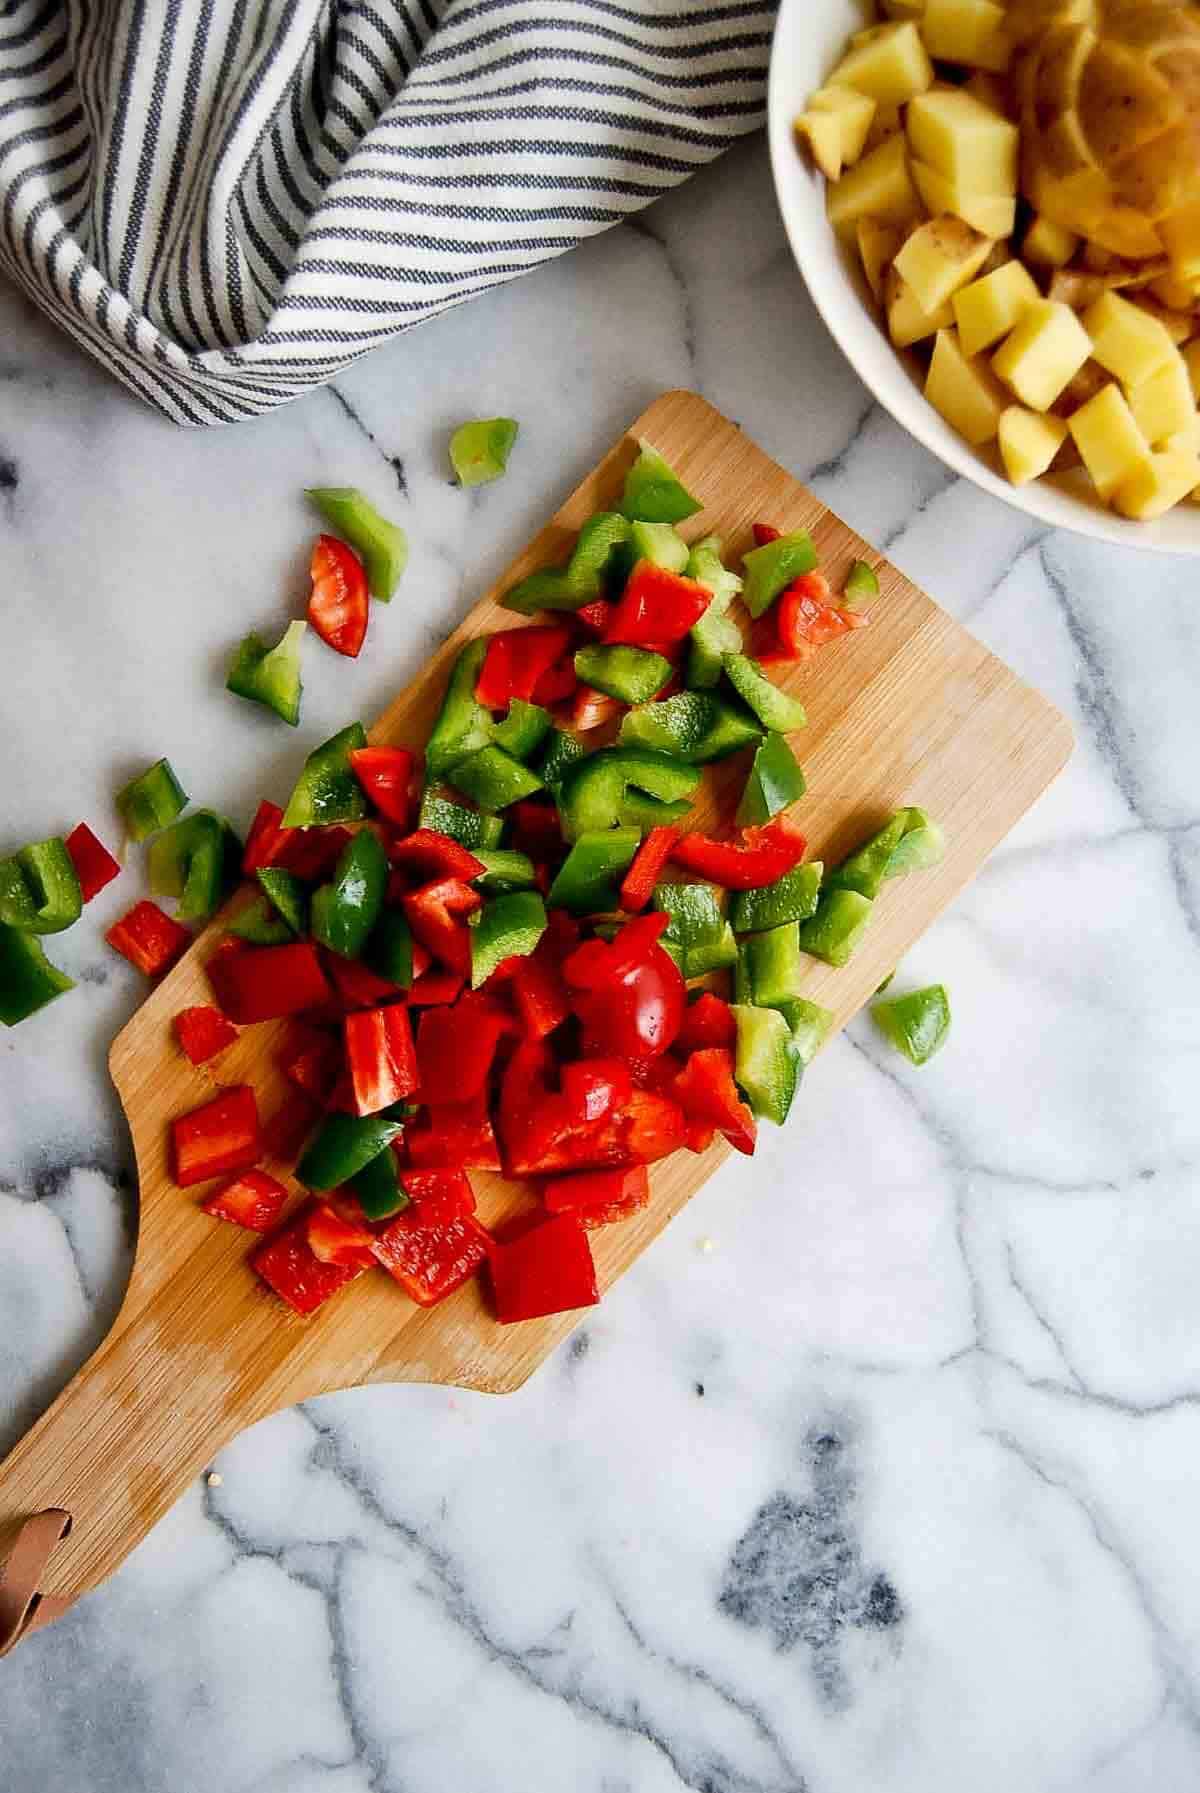 diced red and green pepper on cutting board, with bowl of diced potatoes on the side.